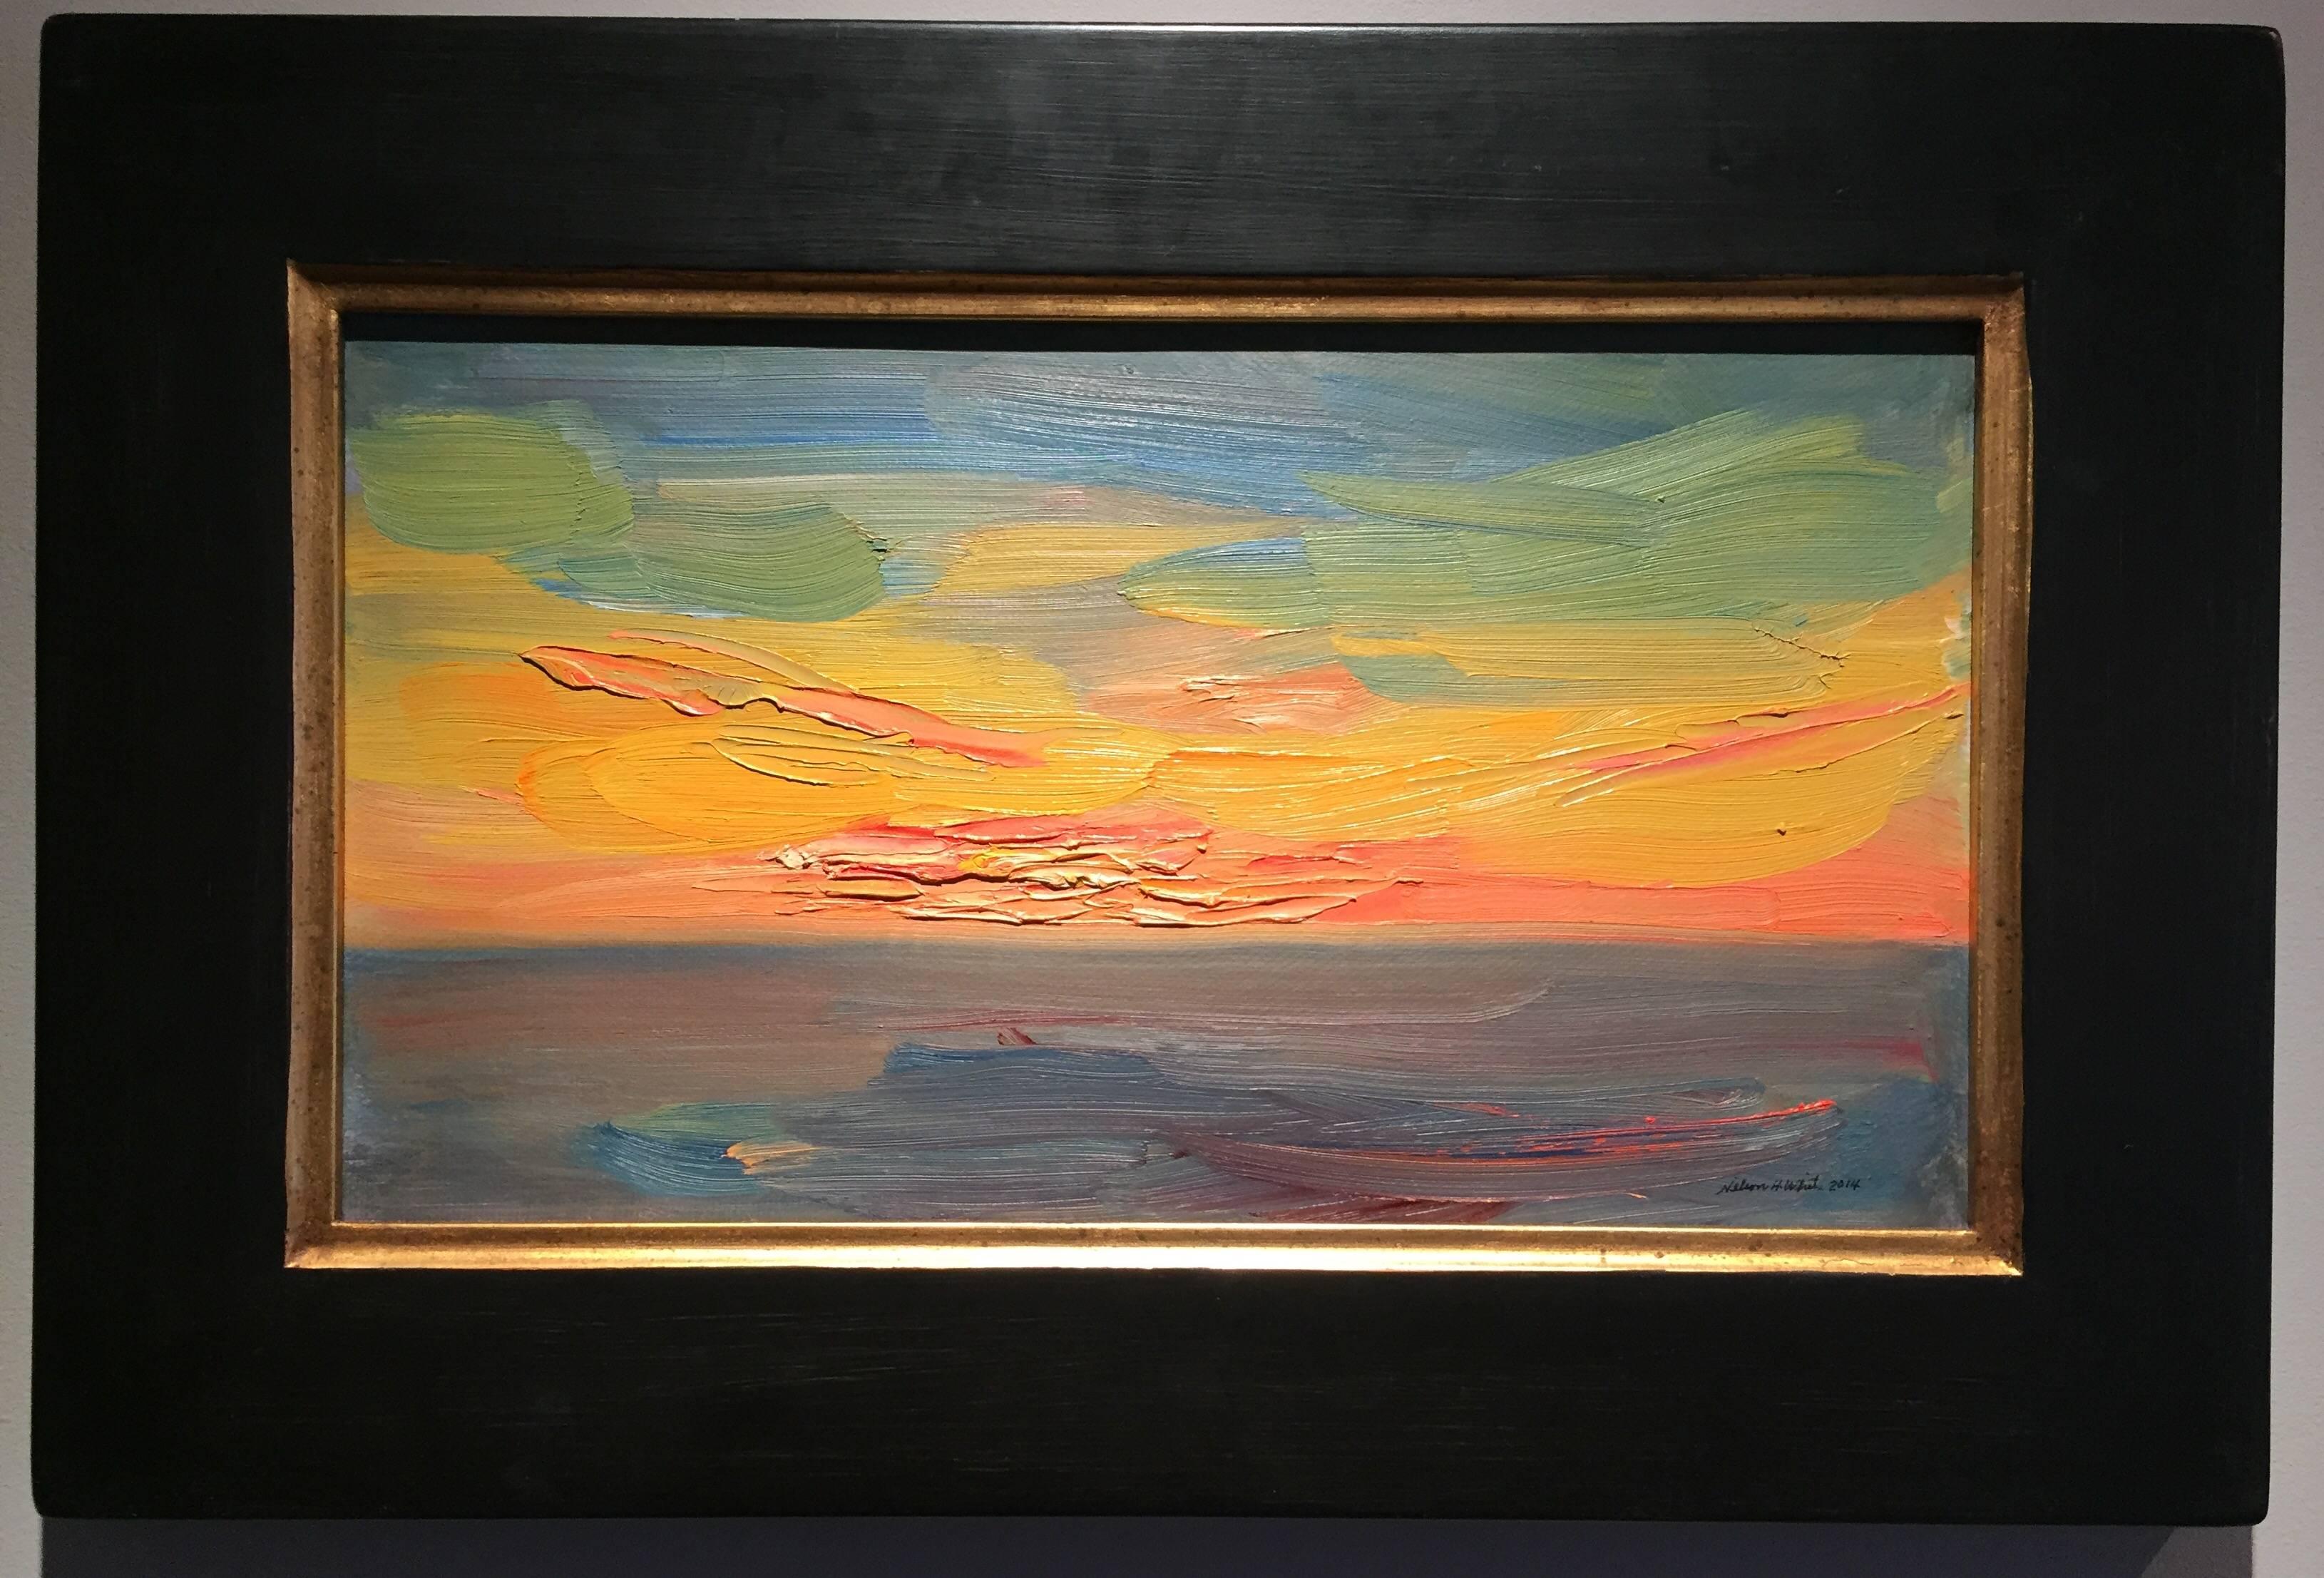 Abstract Painting Nelson H. White - « Sunset, Waterford », peinture à l'huile impressionniste américaine, abstraction colorée